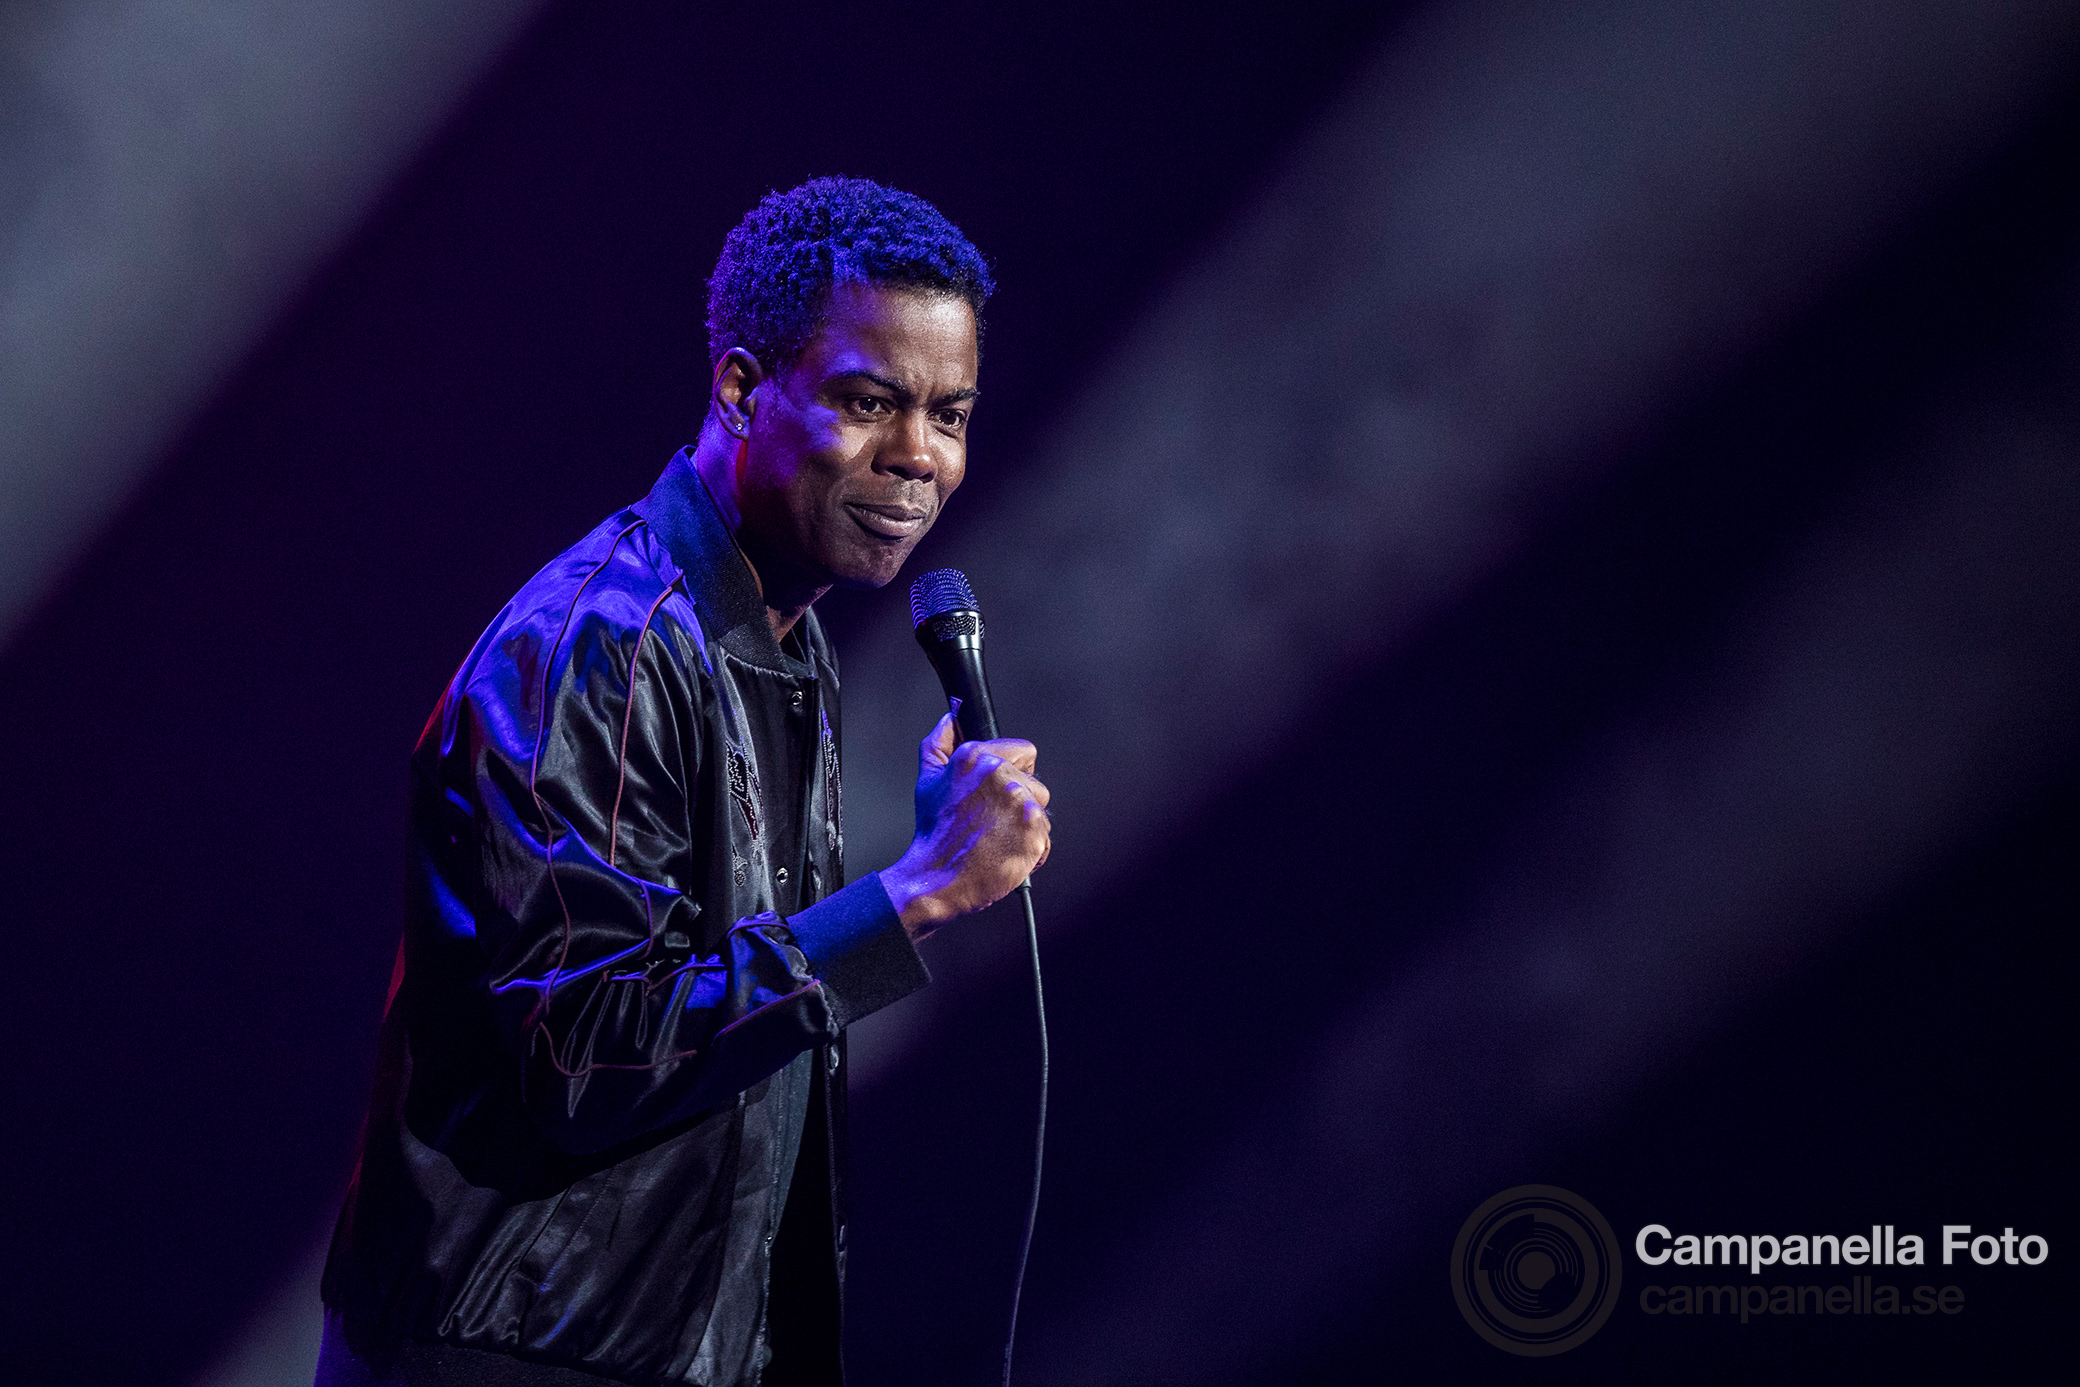 Chris Rock performs in Stockholm - Michael Campanella Photography